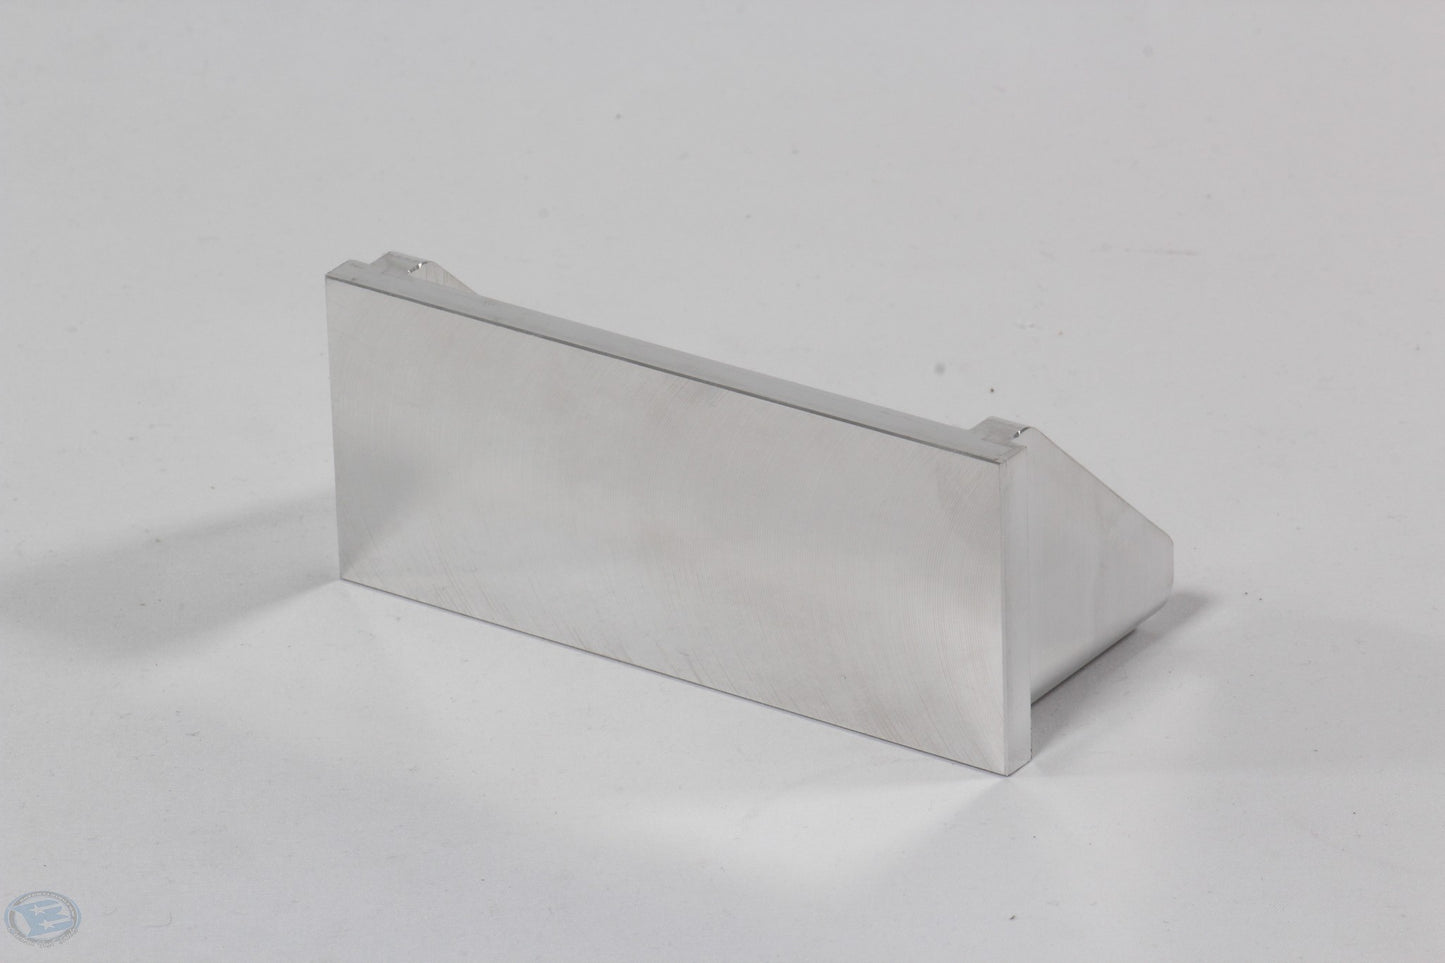 Billet 2x2 4inch long Mounting Tabs  4Pack